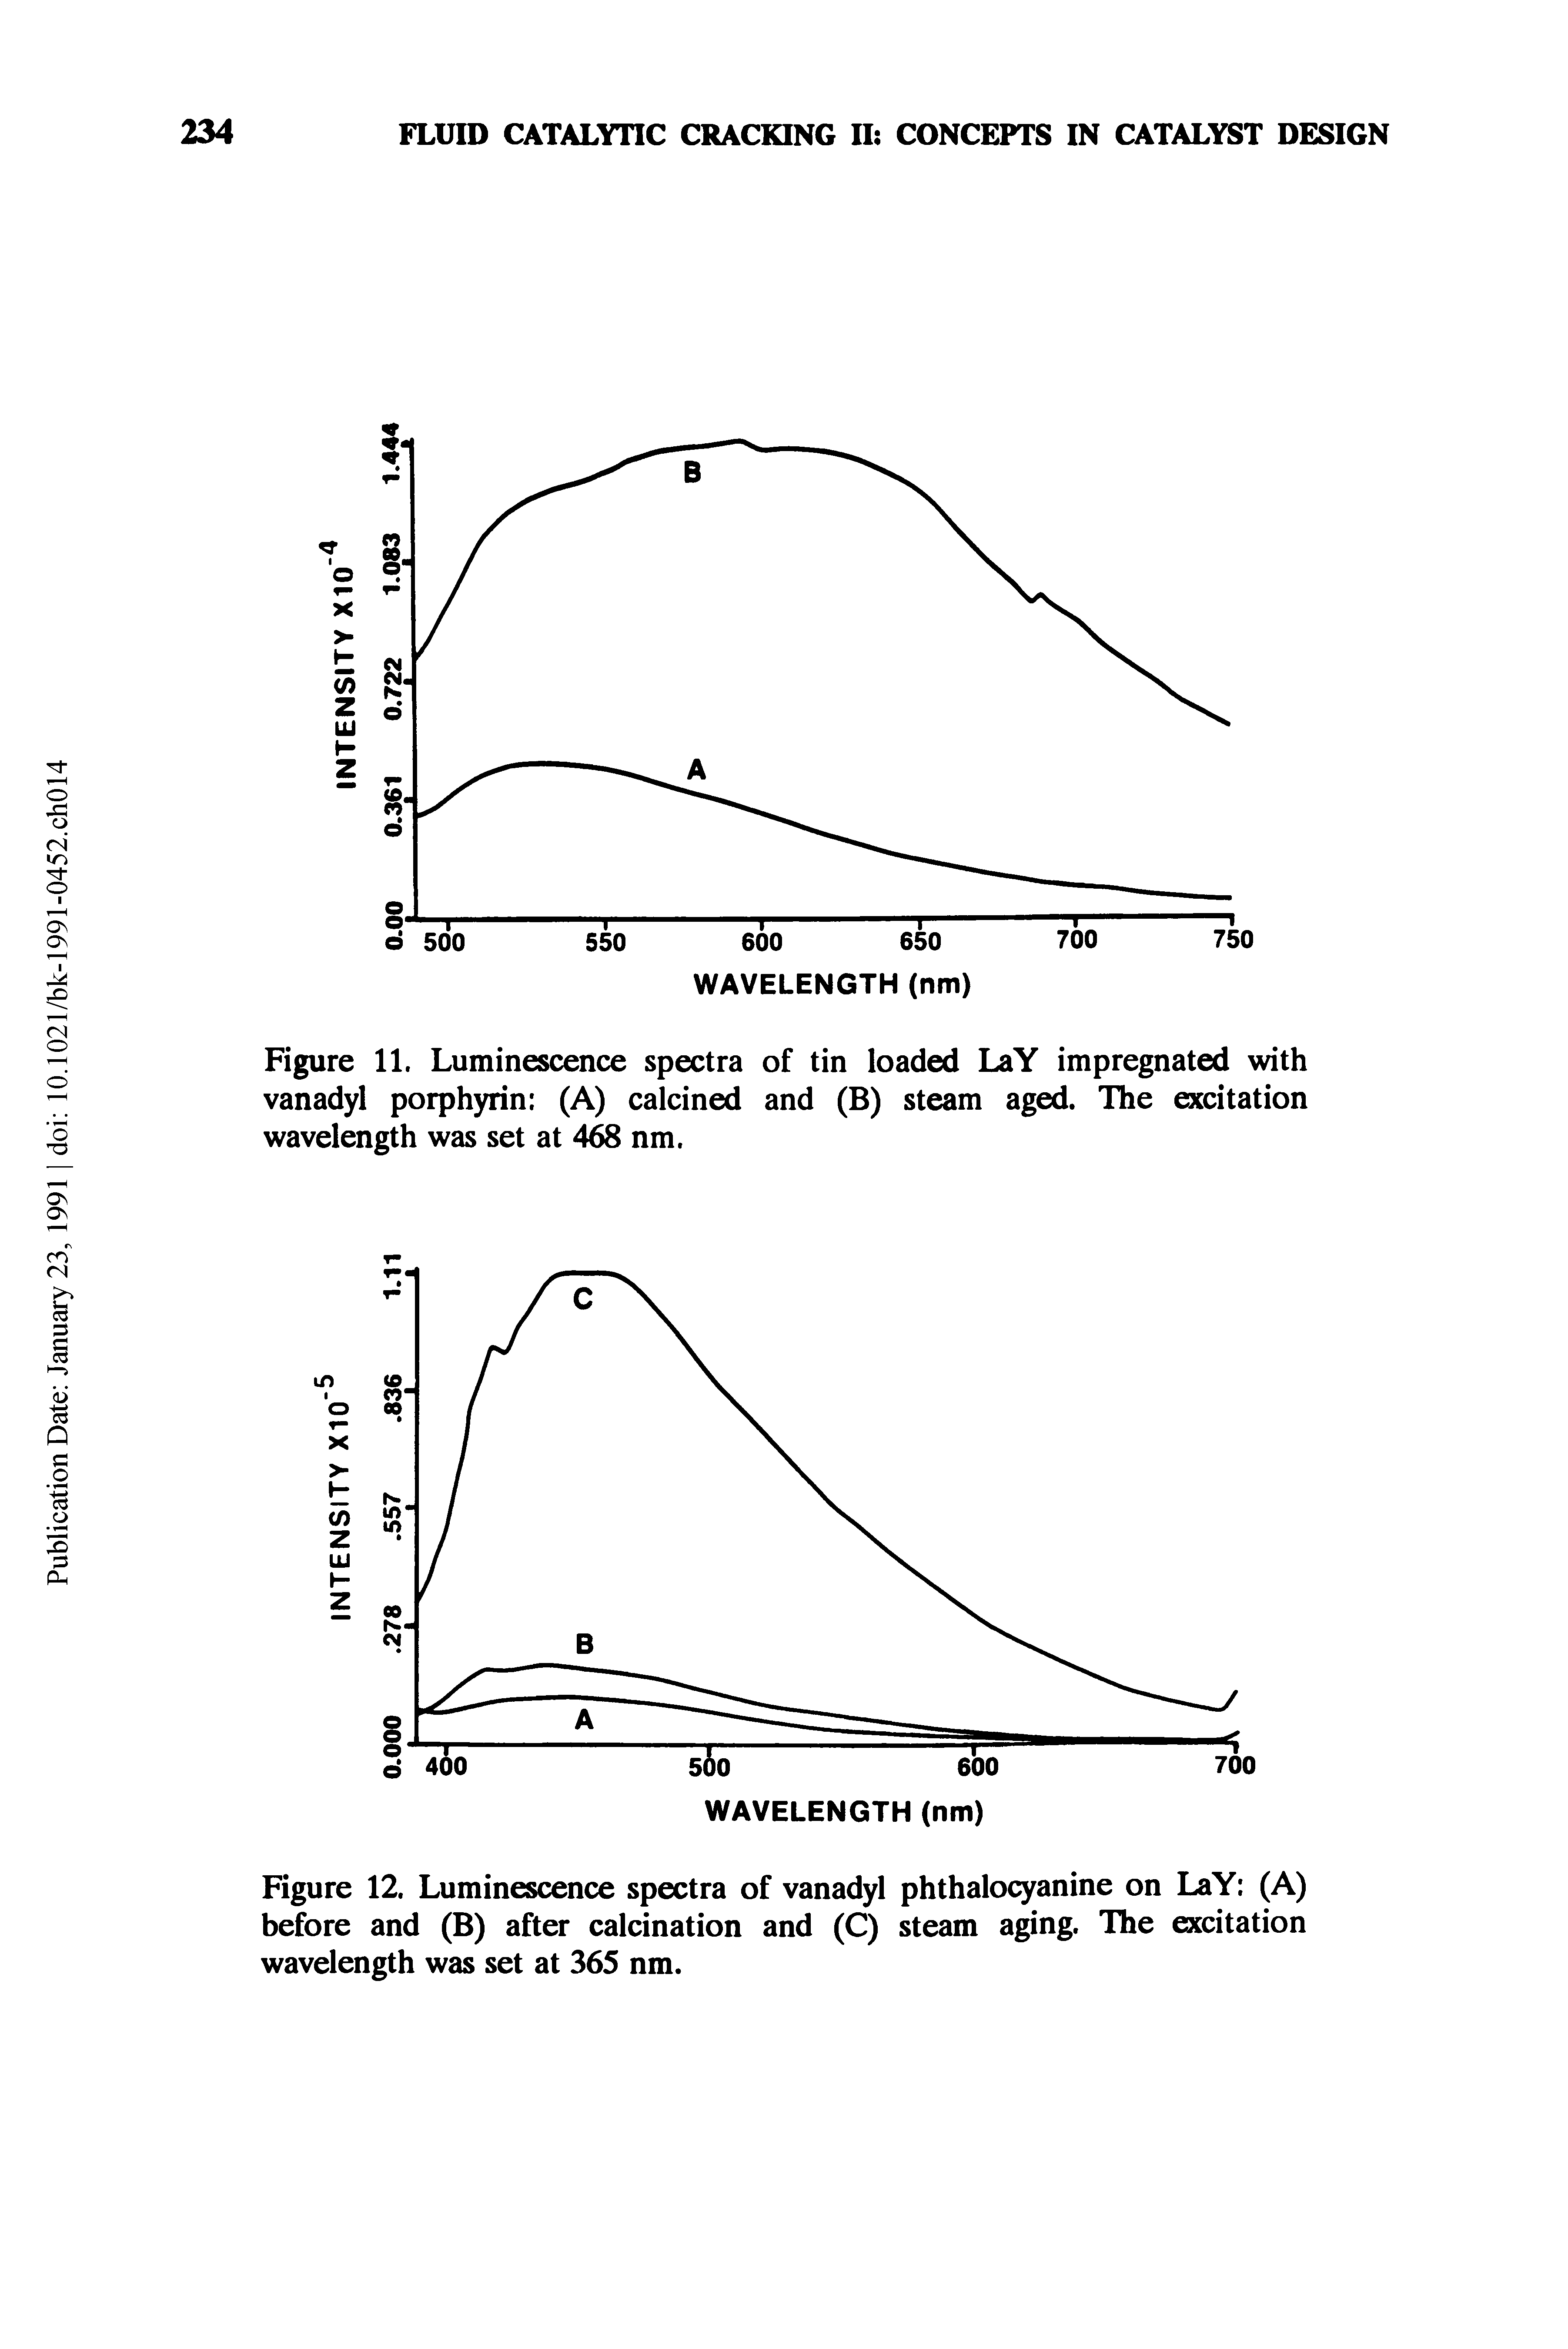 Figure 12. Luminescence spectra of vanadyl phthalocyanine on LaY (A) before and (B) after calcination and (C) steam aging. The excitation wavelength was set at 365 nm.